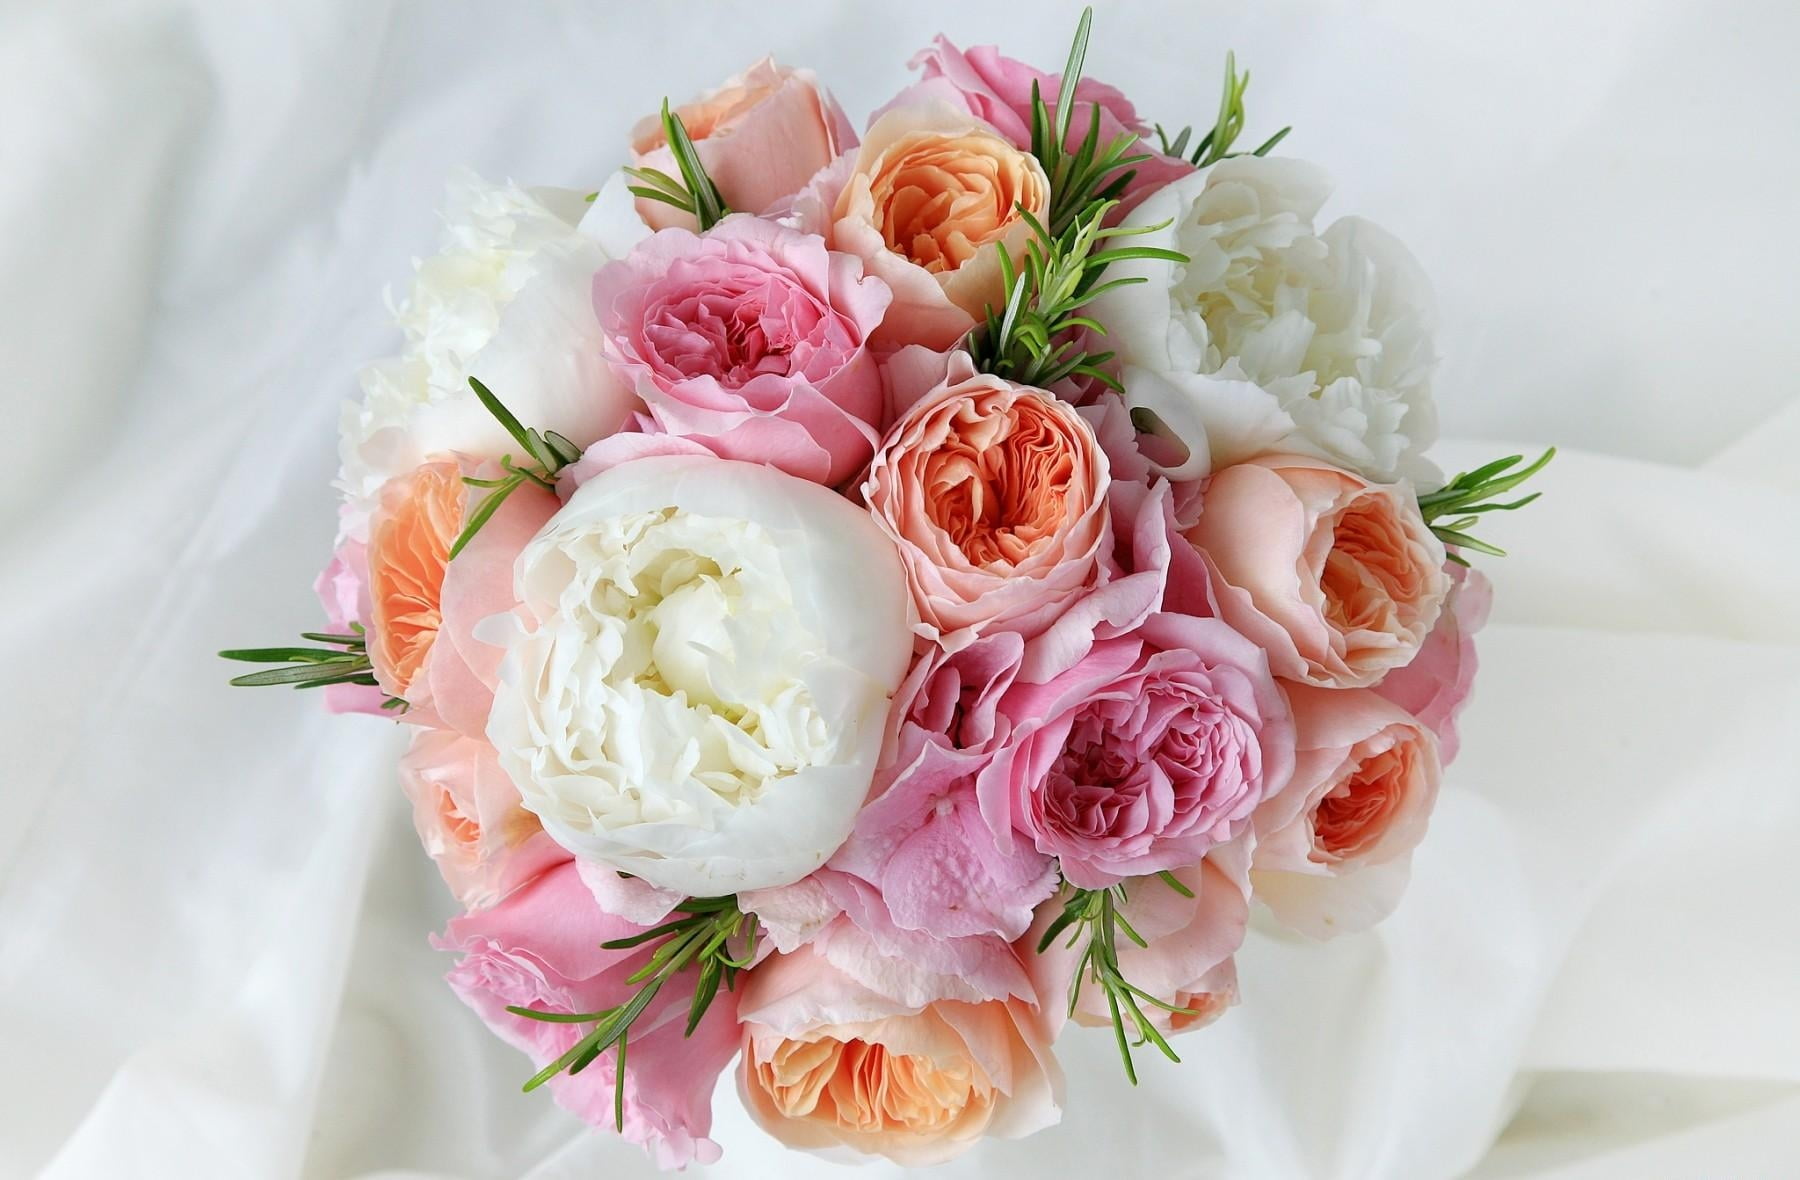 bouquet of pink and white flowers, roses, peonies, tenderness